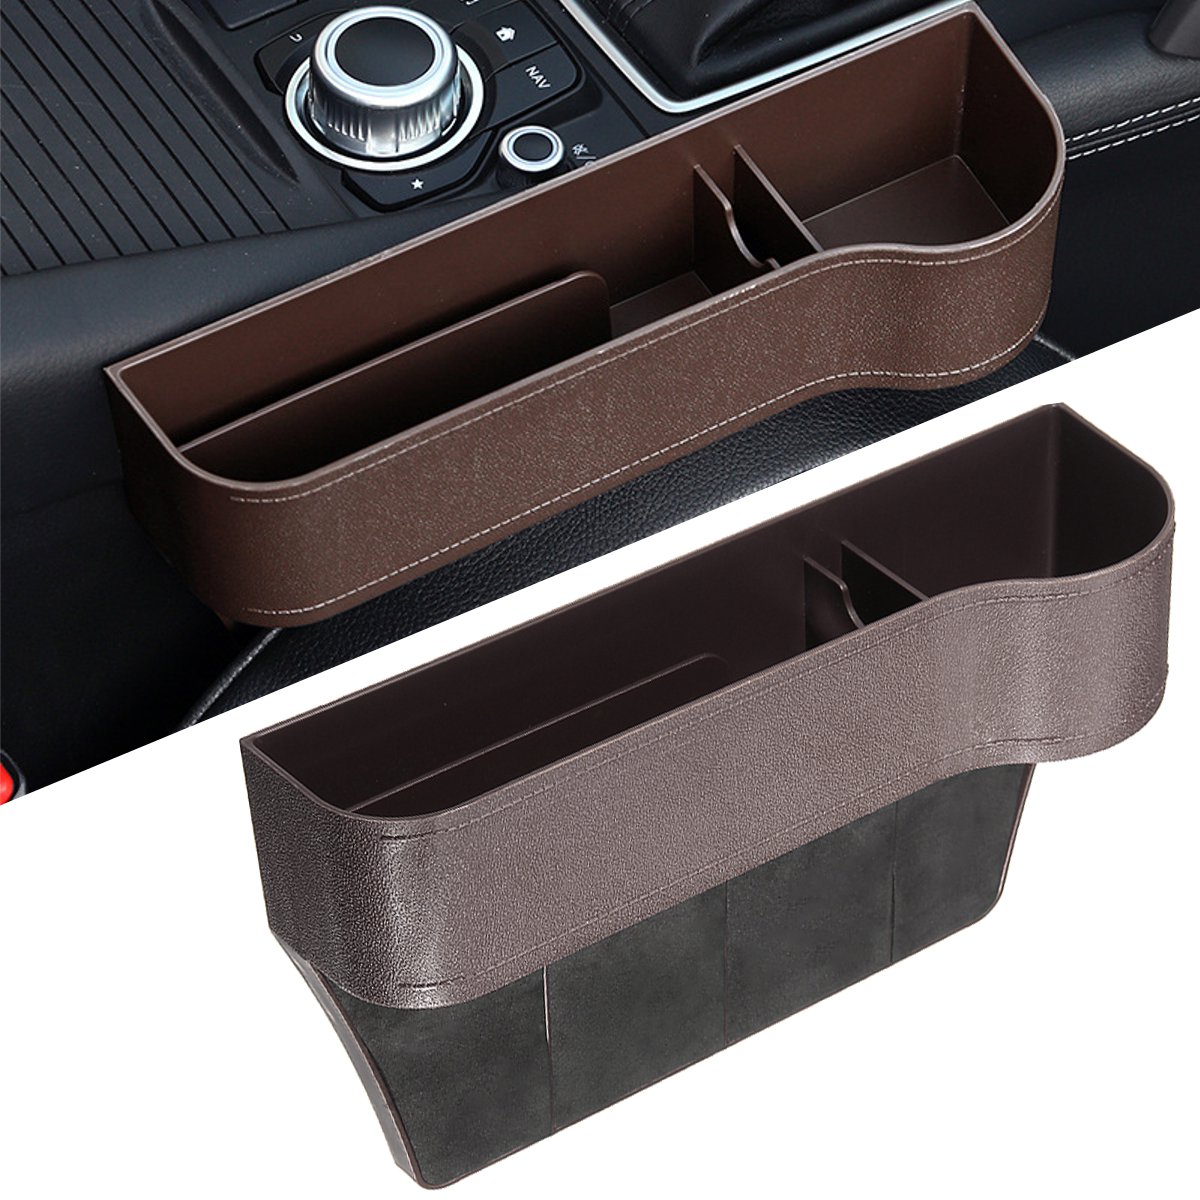 Left / Right Car Seat Crevice Gaps Storage Box ABS Plastic Auto Drink for Pockets Organizers Stowing Tidying Universal